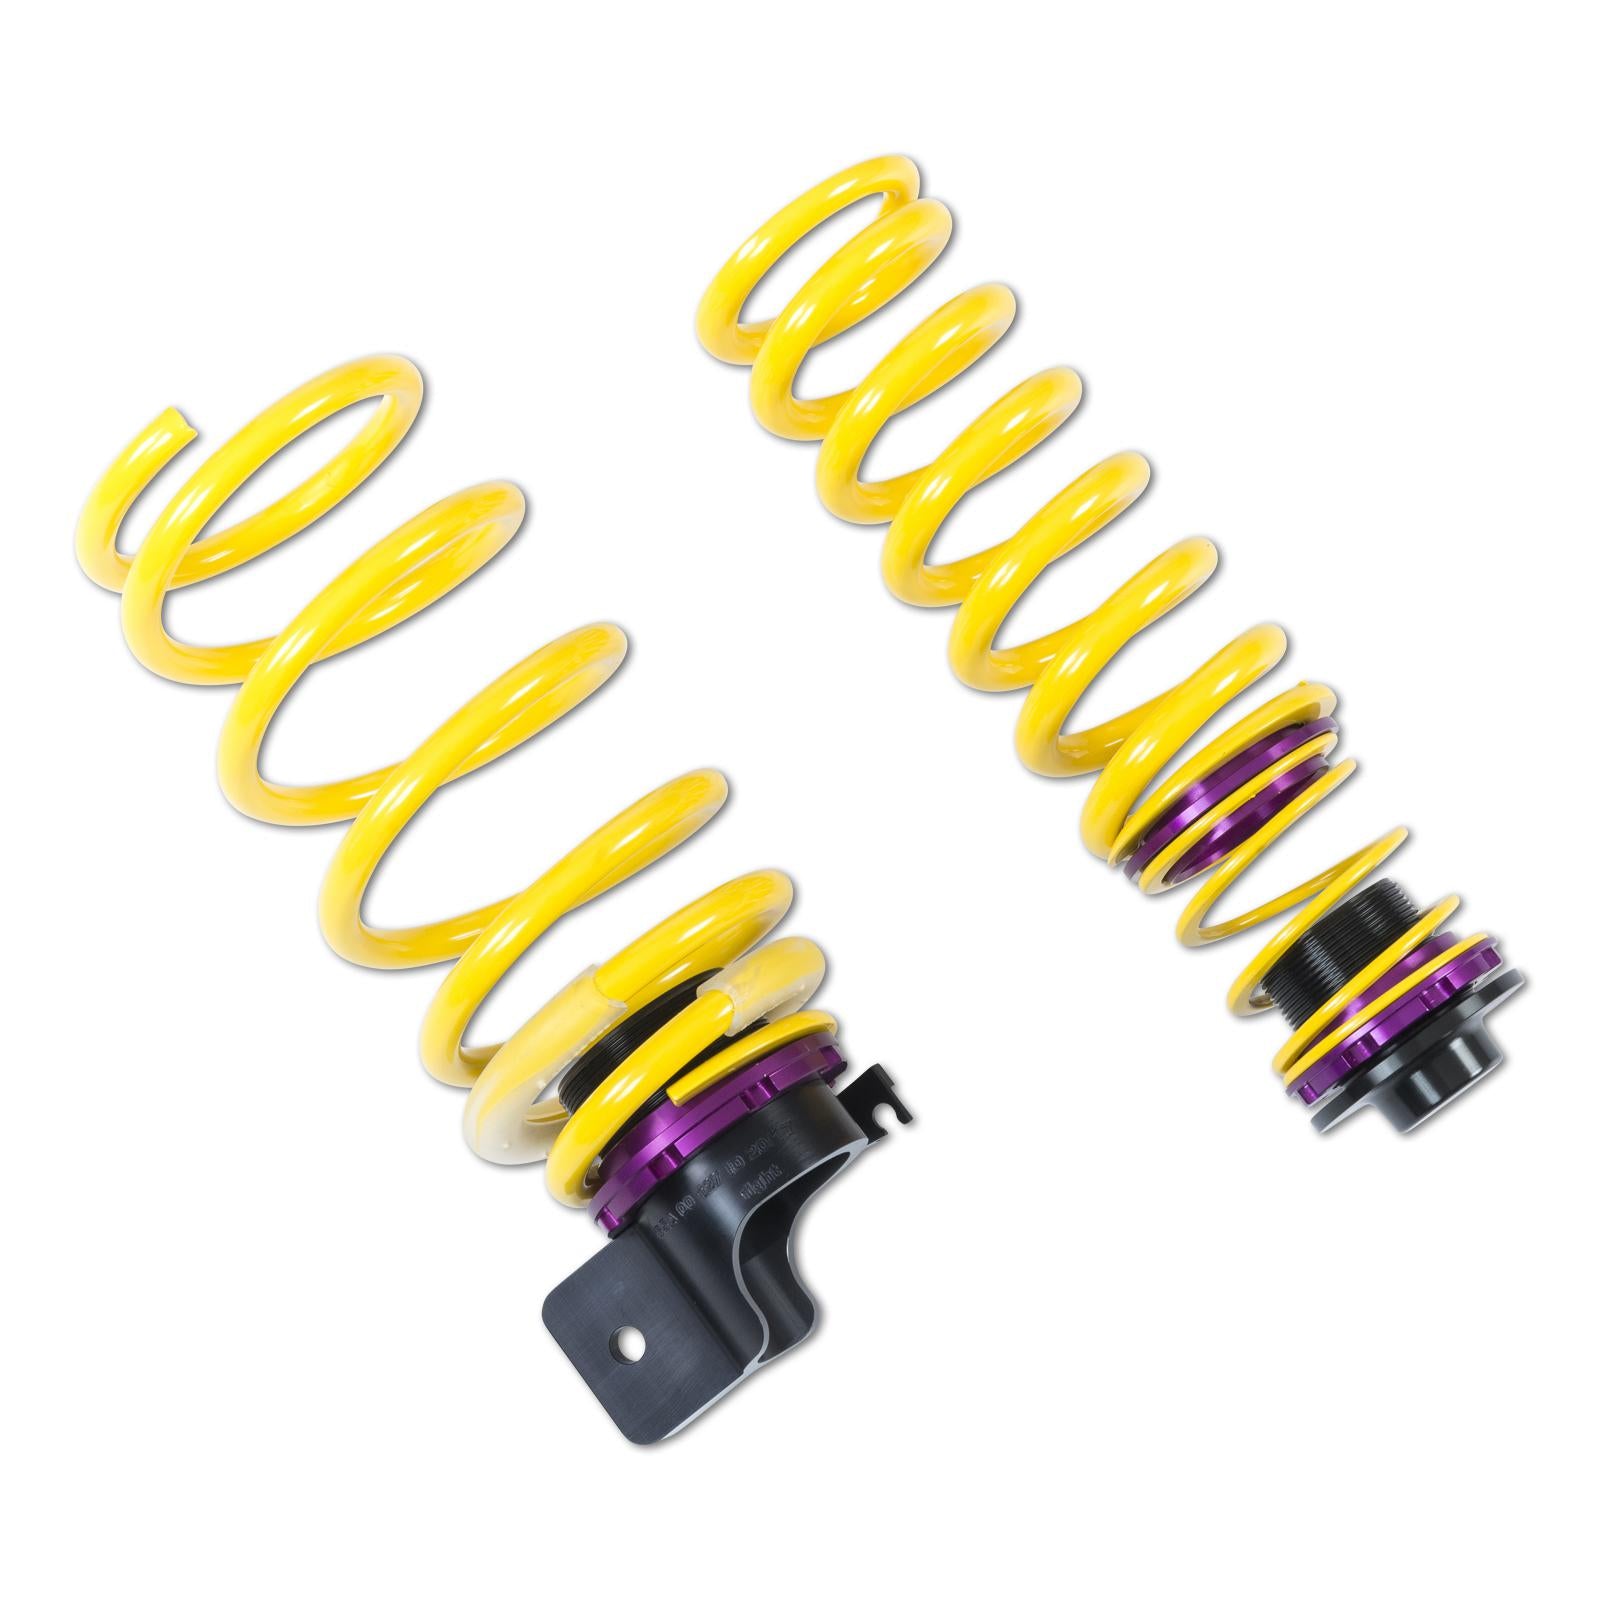 KW BMW F87 F80 F82 Height adjustable Coilover Spring Kits (M2, M3, M4) - ML Performance UK